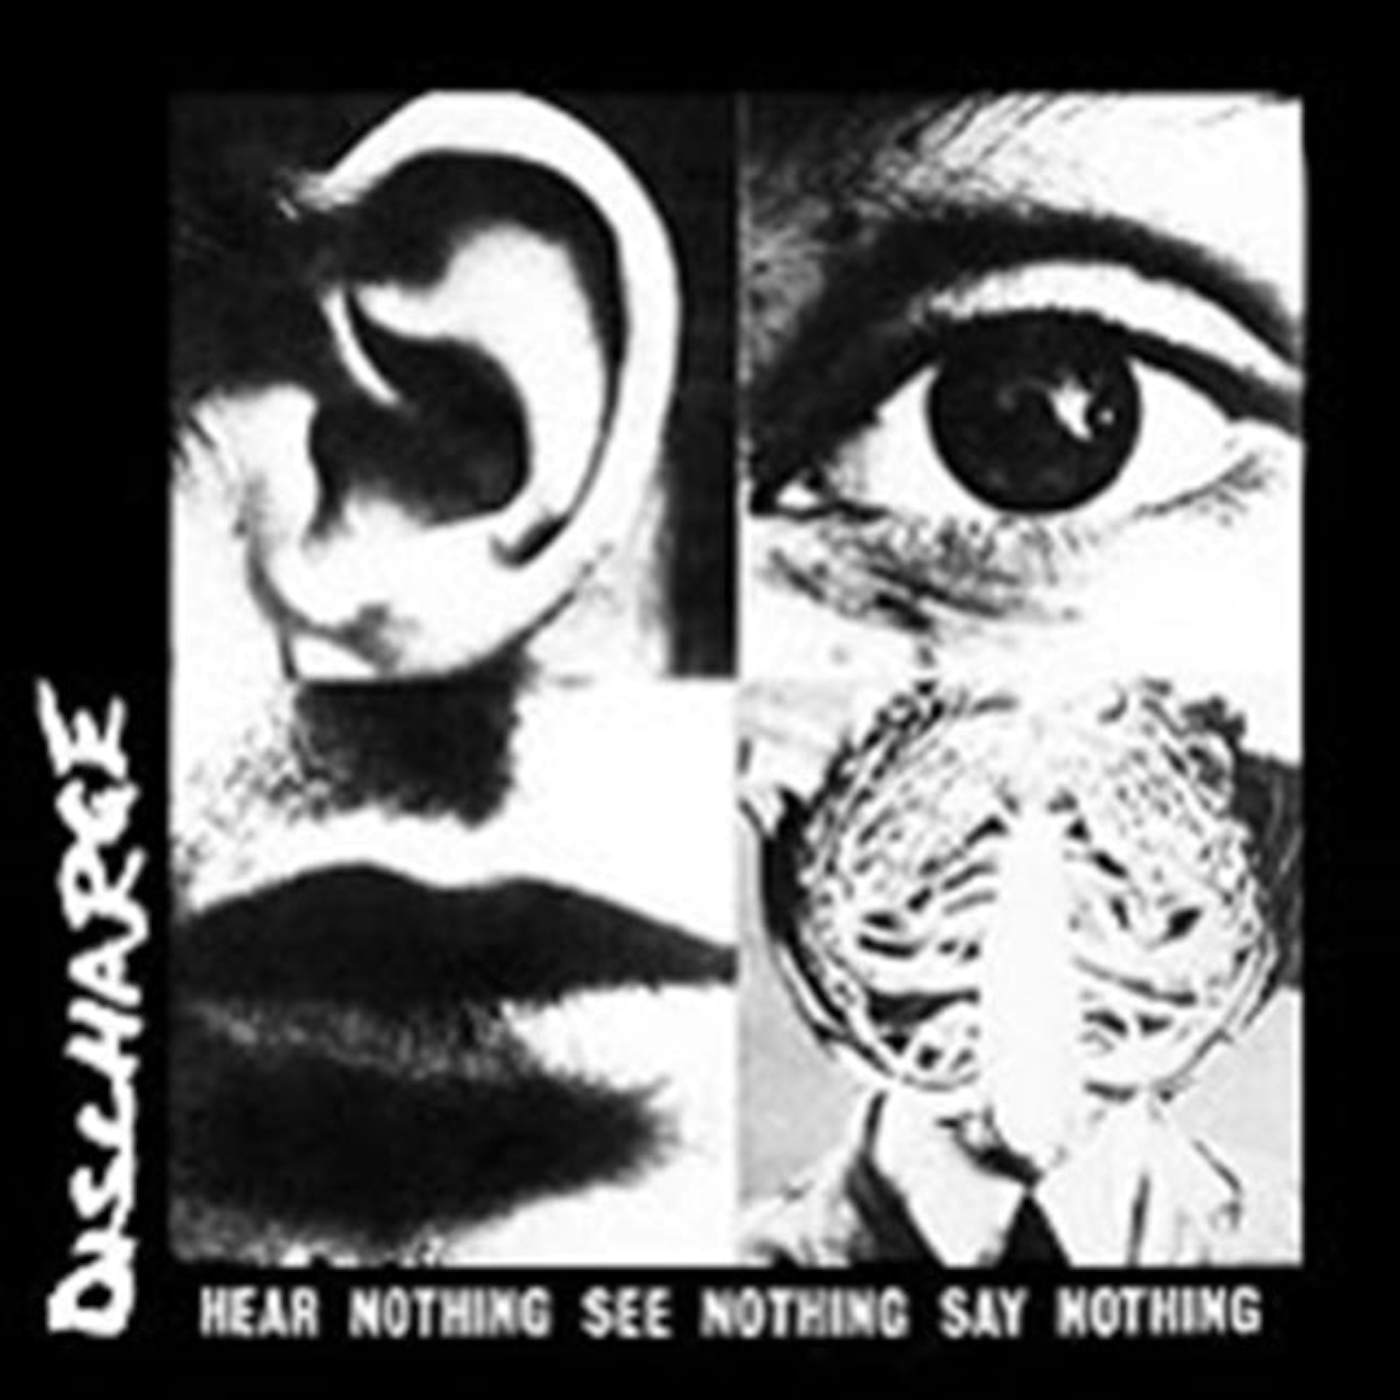 Discharge CD - Hear Nothing See Nothing Say Nothing (Deluxe Digipak)